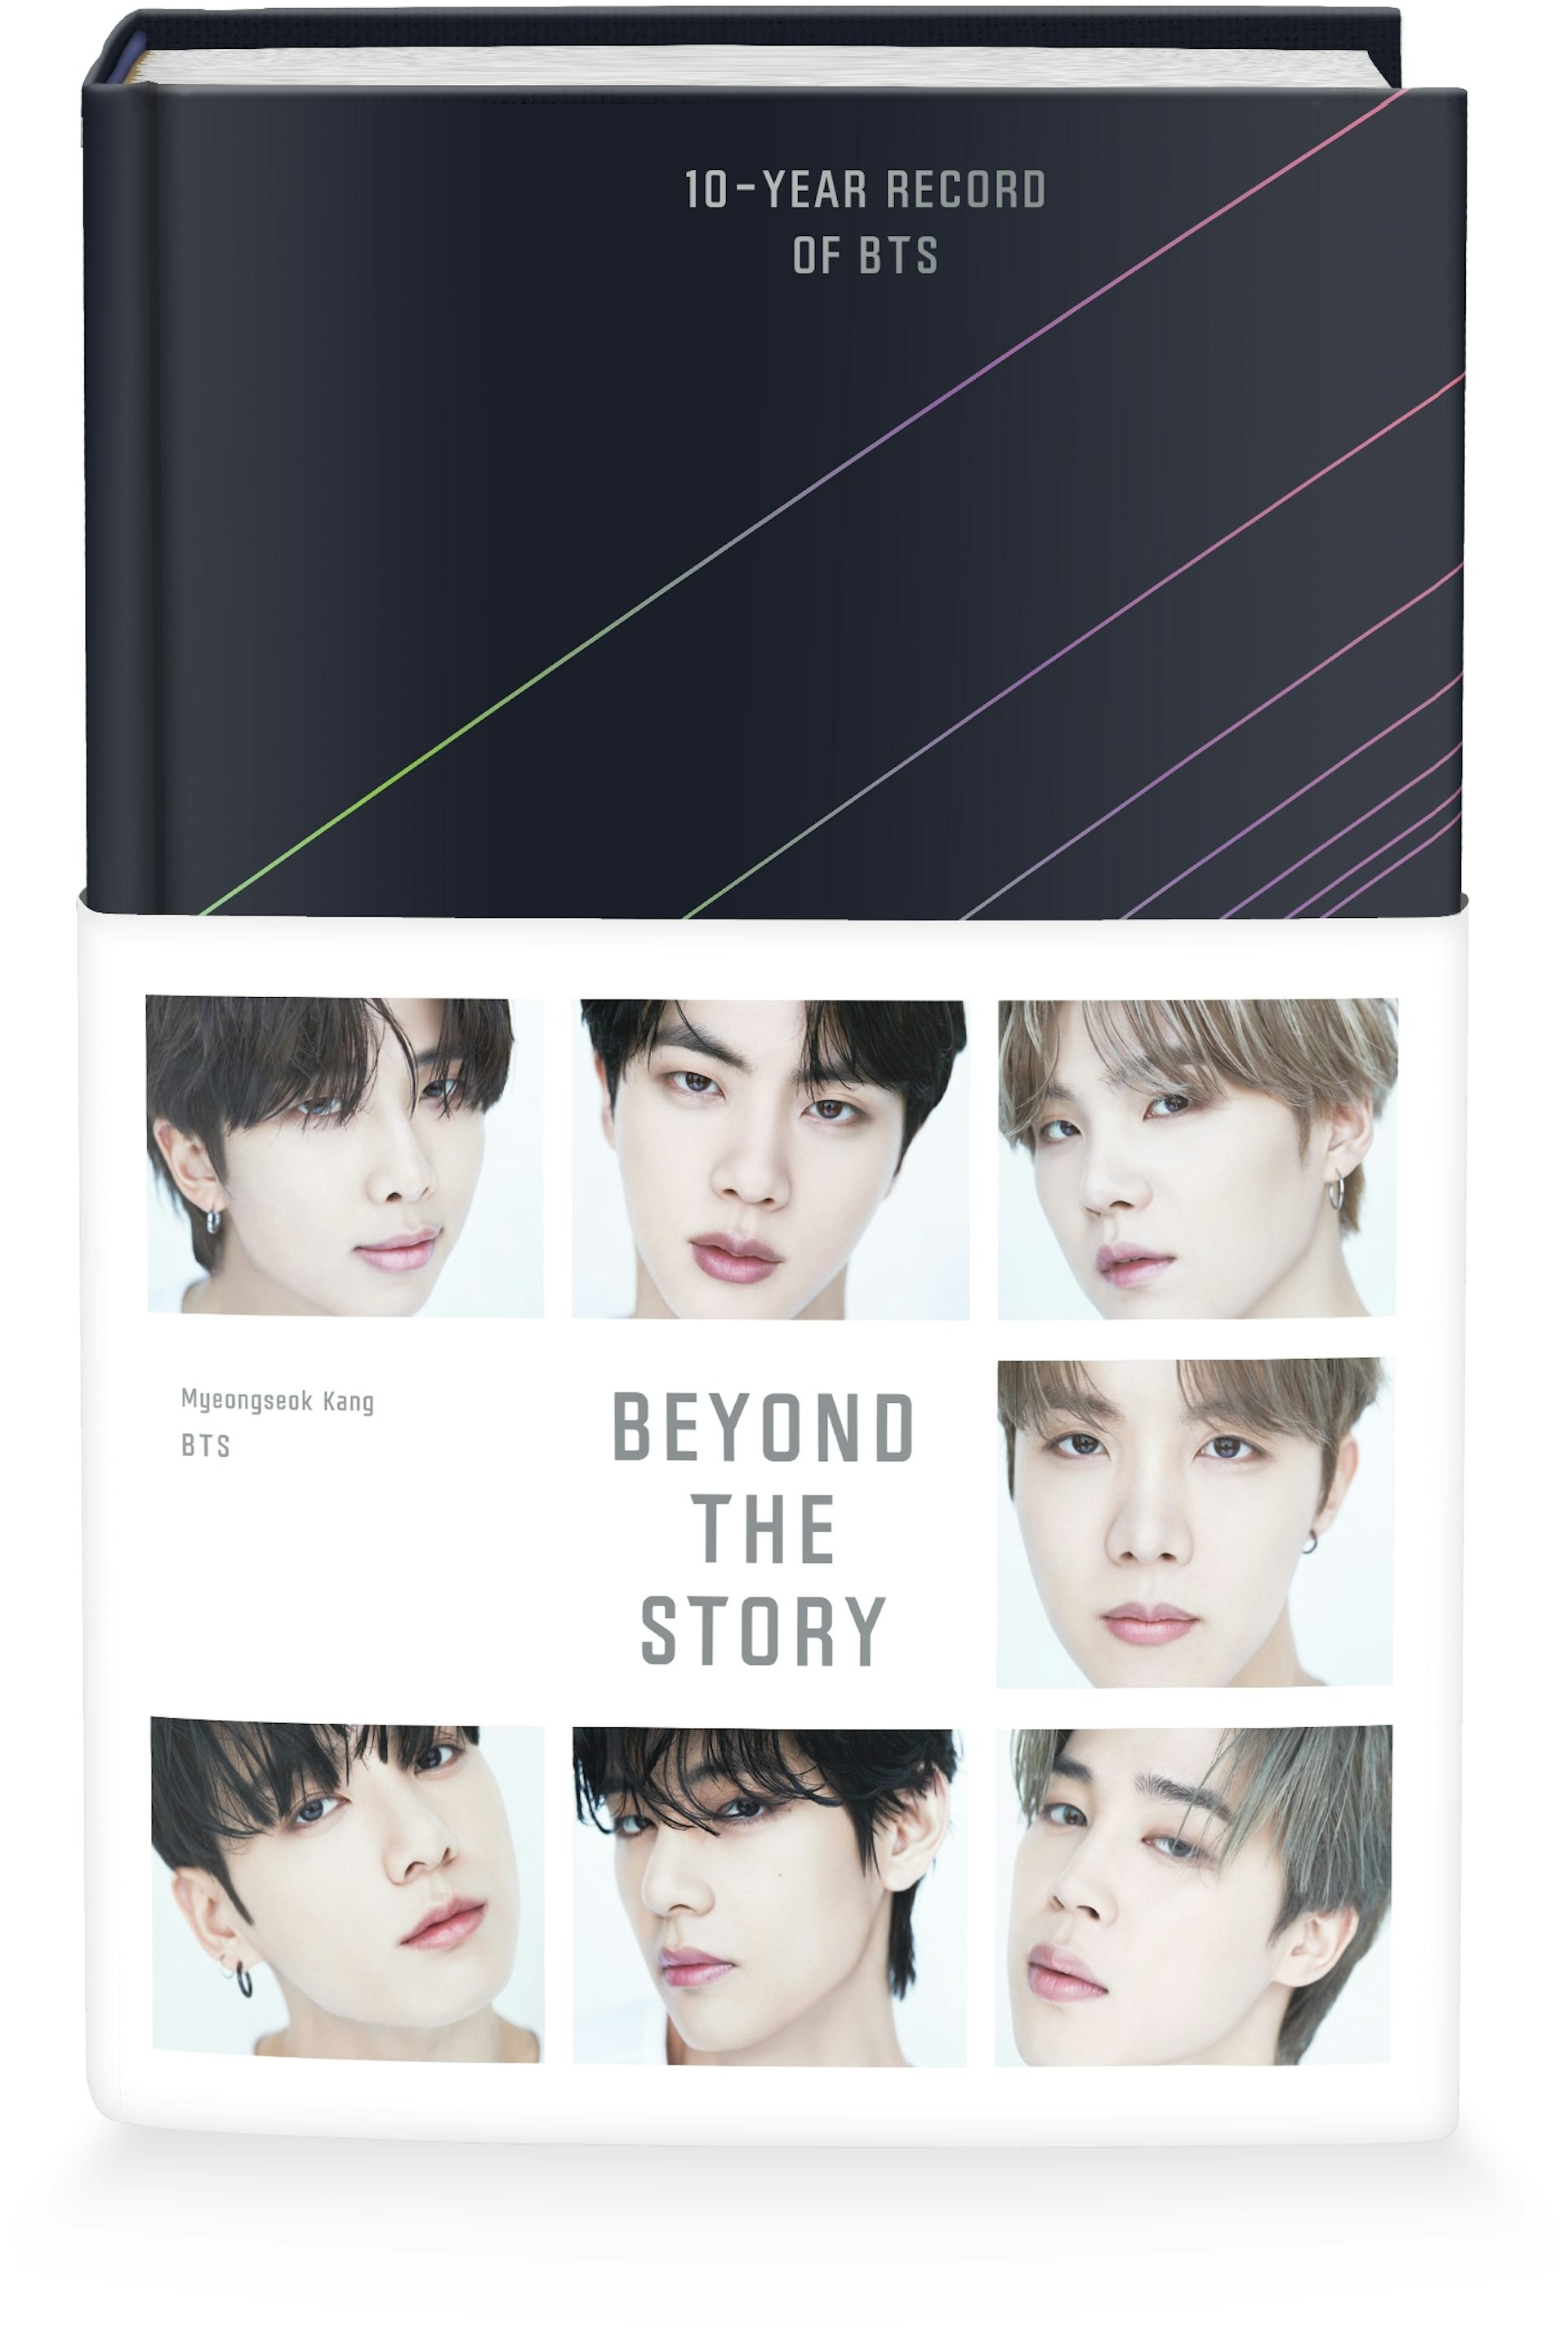 Beyond The Story: BTS biography is a humanising, literary